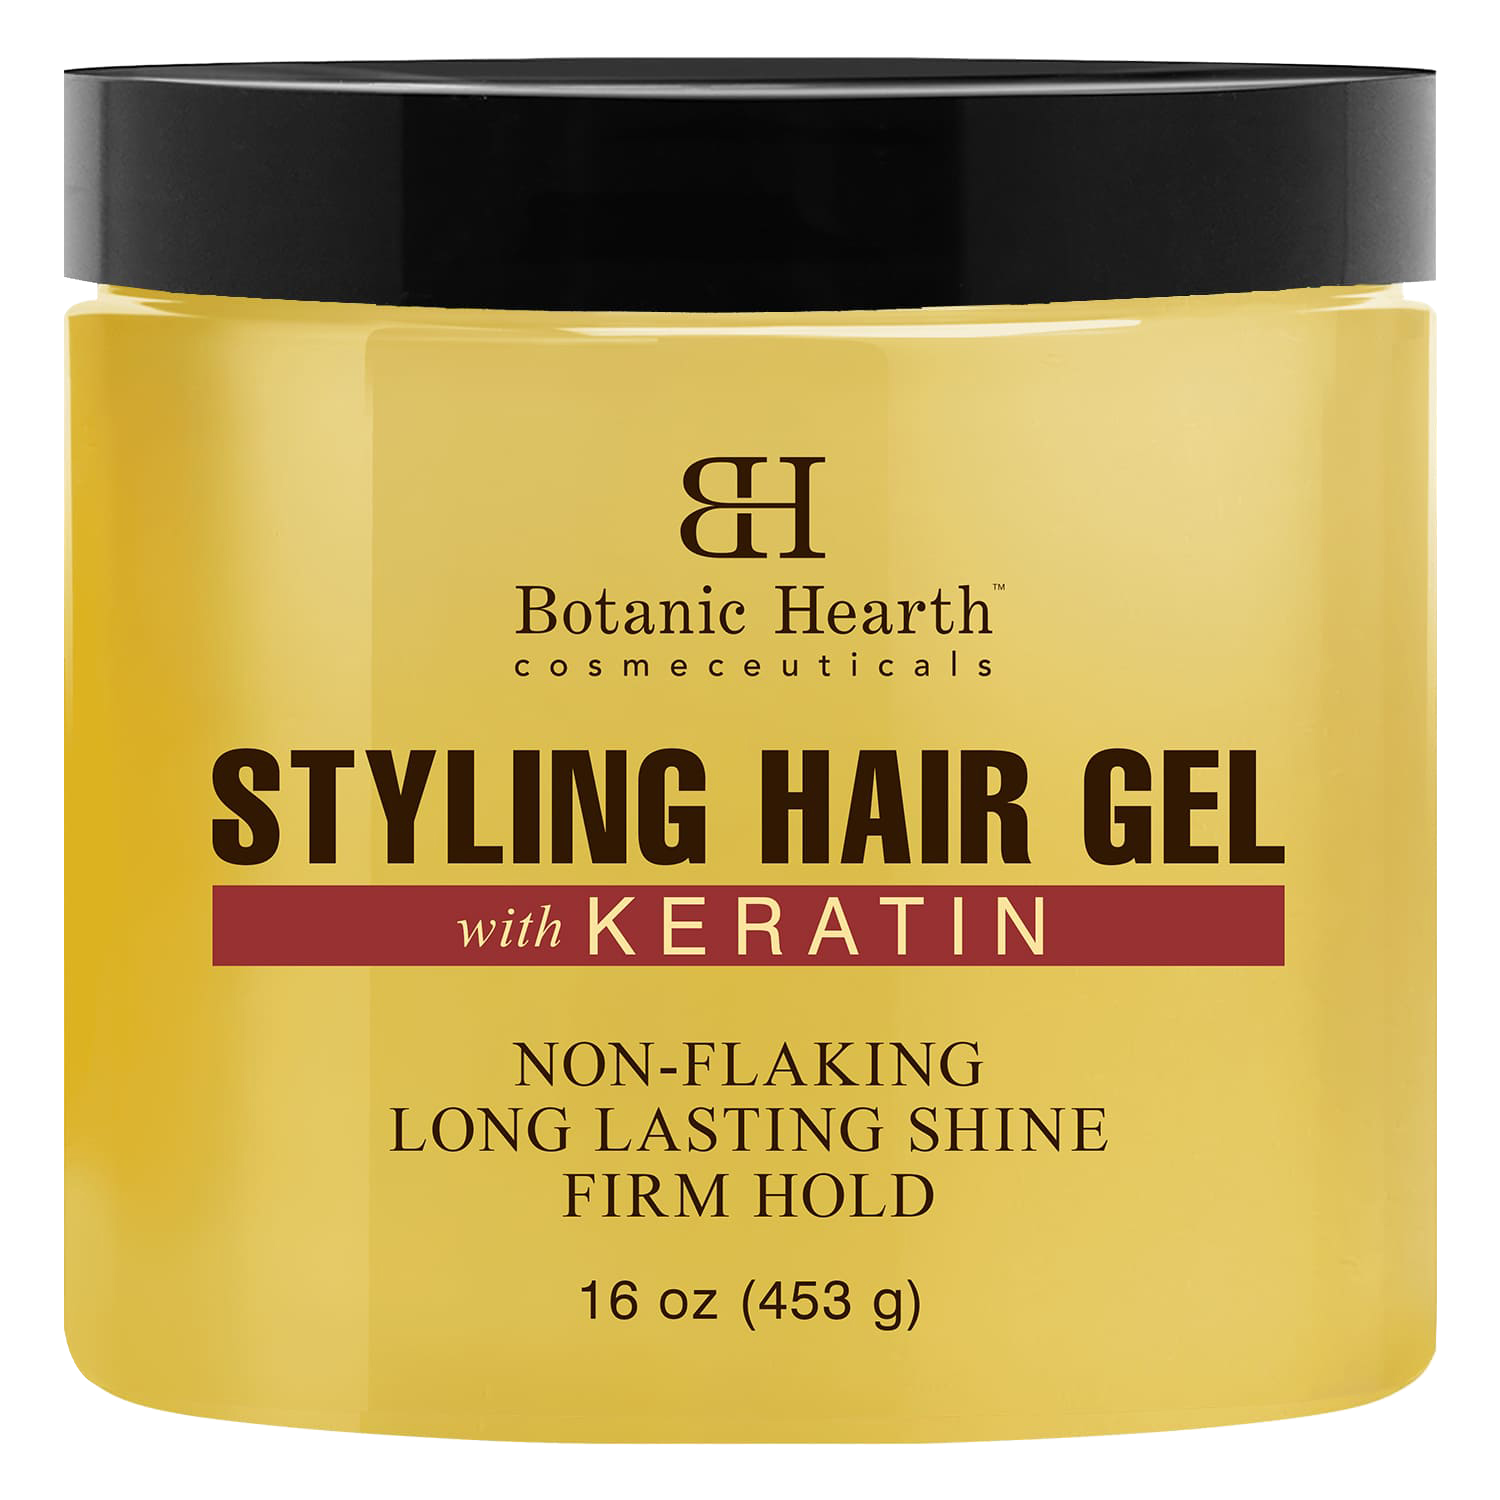 Styling Hair Gel with Keratin Protein | Hair Care | Botanic Hearth®